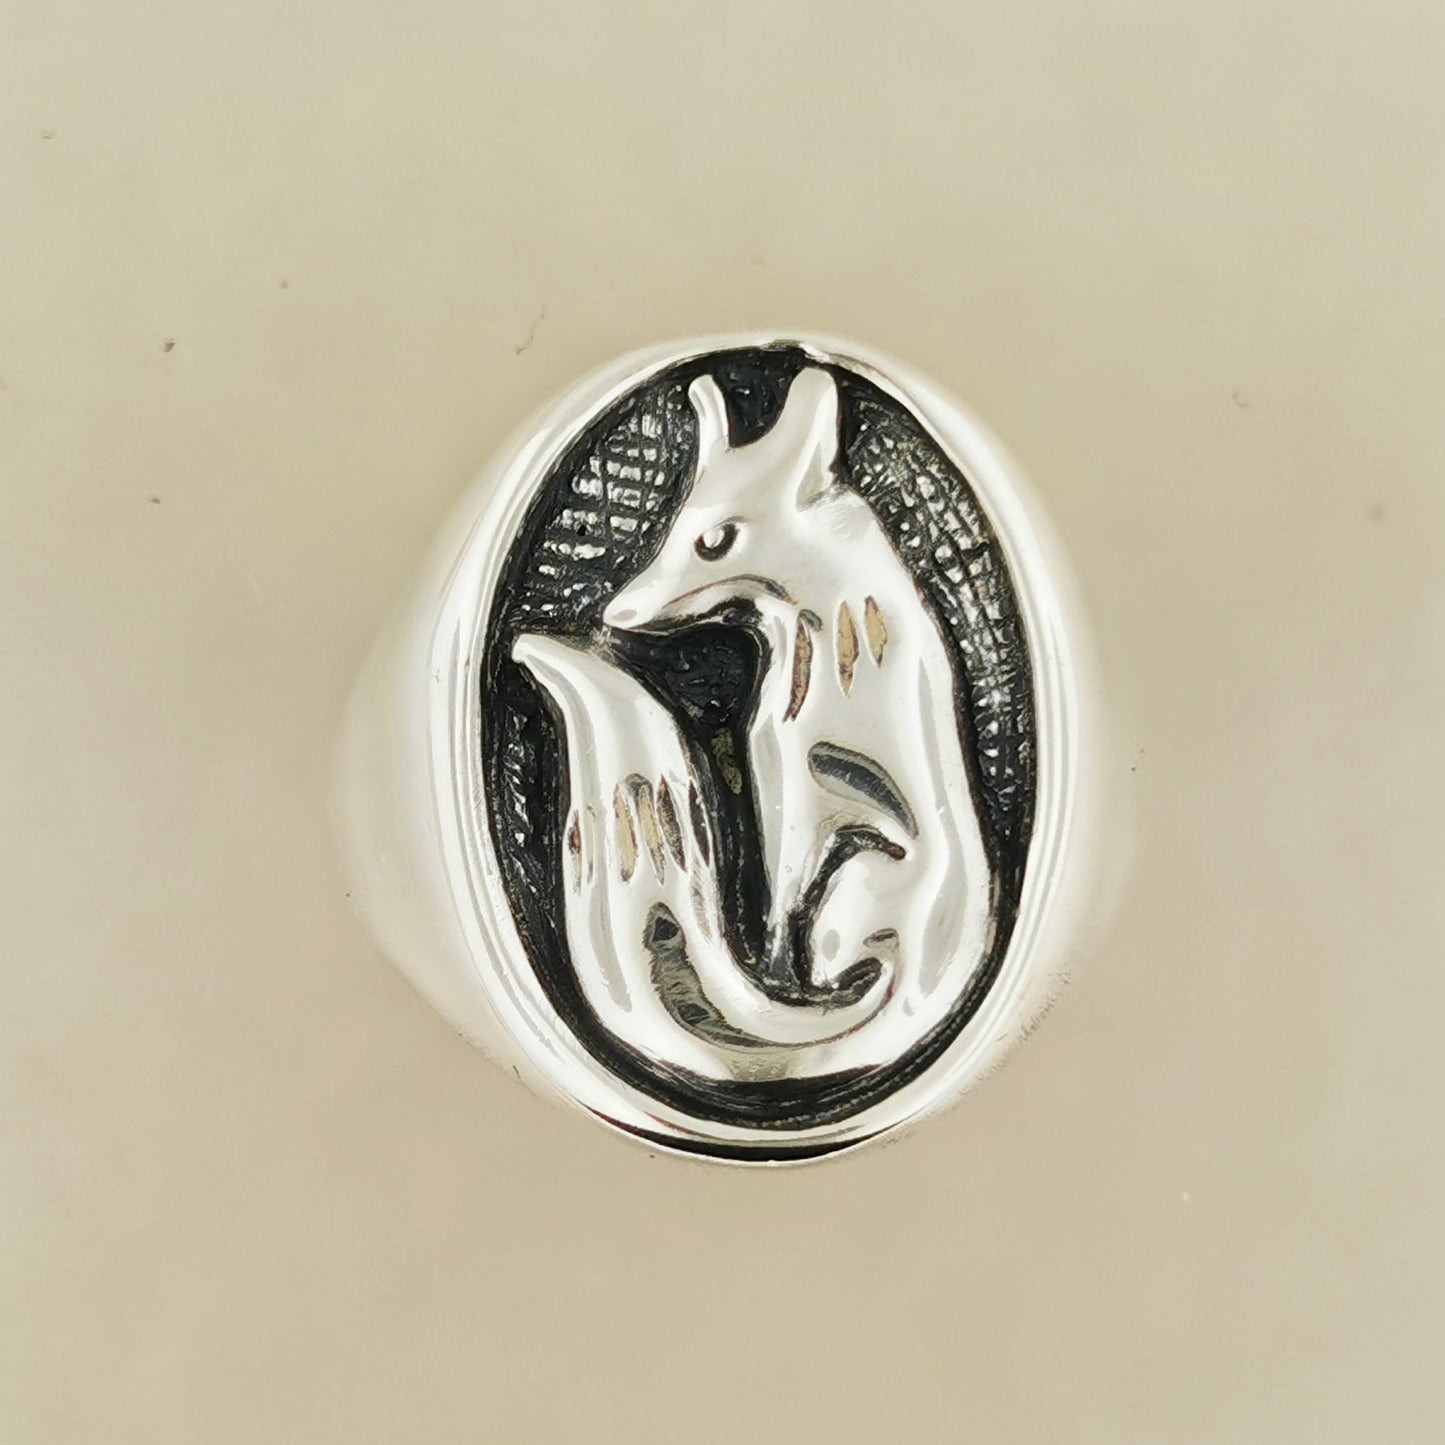 Fox Signet Ring in 925 Sterling Silver or Bronze, Fox Wedding Ring, Fox Tail Ring, Fox Jewelry, Jewellery Gift for Fox Lover, Silver Animal Ring, Silver Fox Ring, Sterling Silver Fox Jewelry, Silver Kitsune Ring, Kitsune Fox Ring, Fox Lover Ring